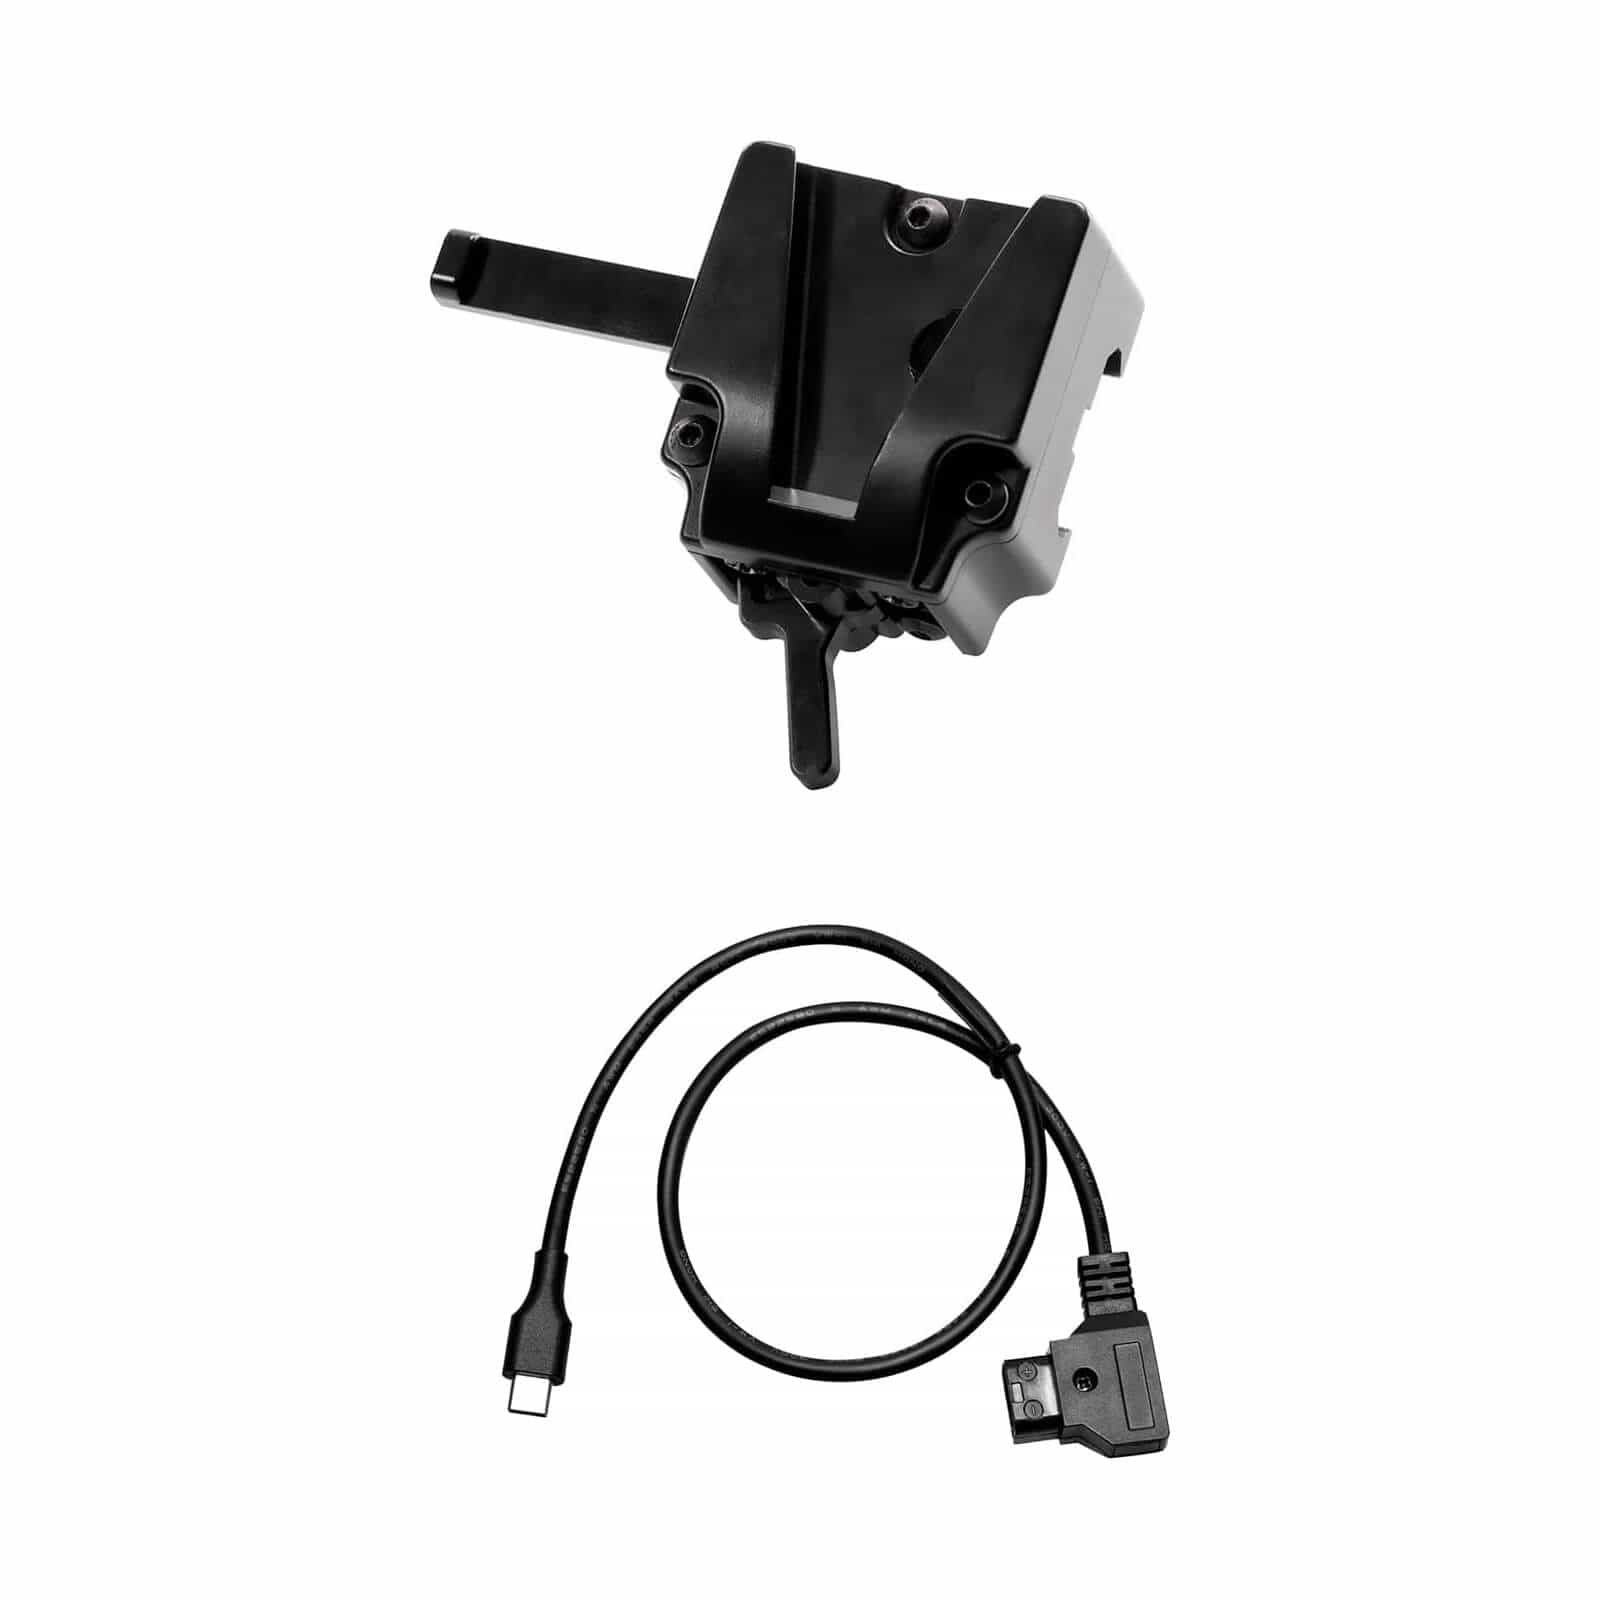 COLBOR VM2 includes a V-mount adapter and a D-Tap to Type-C cable.